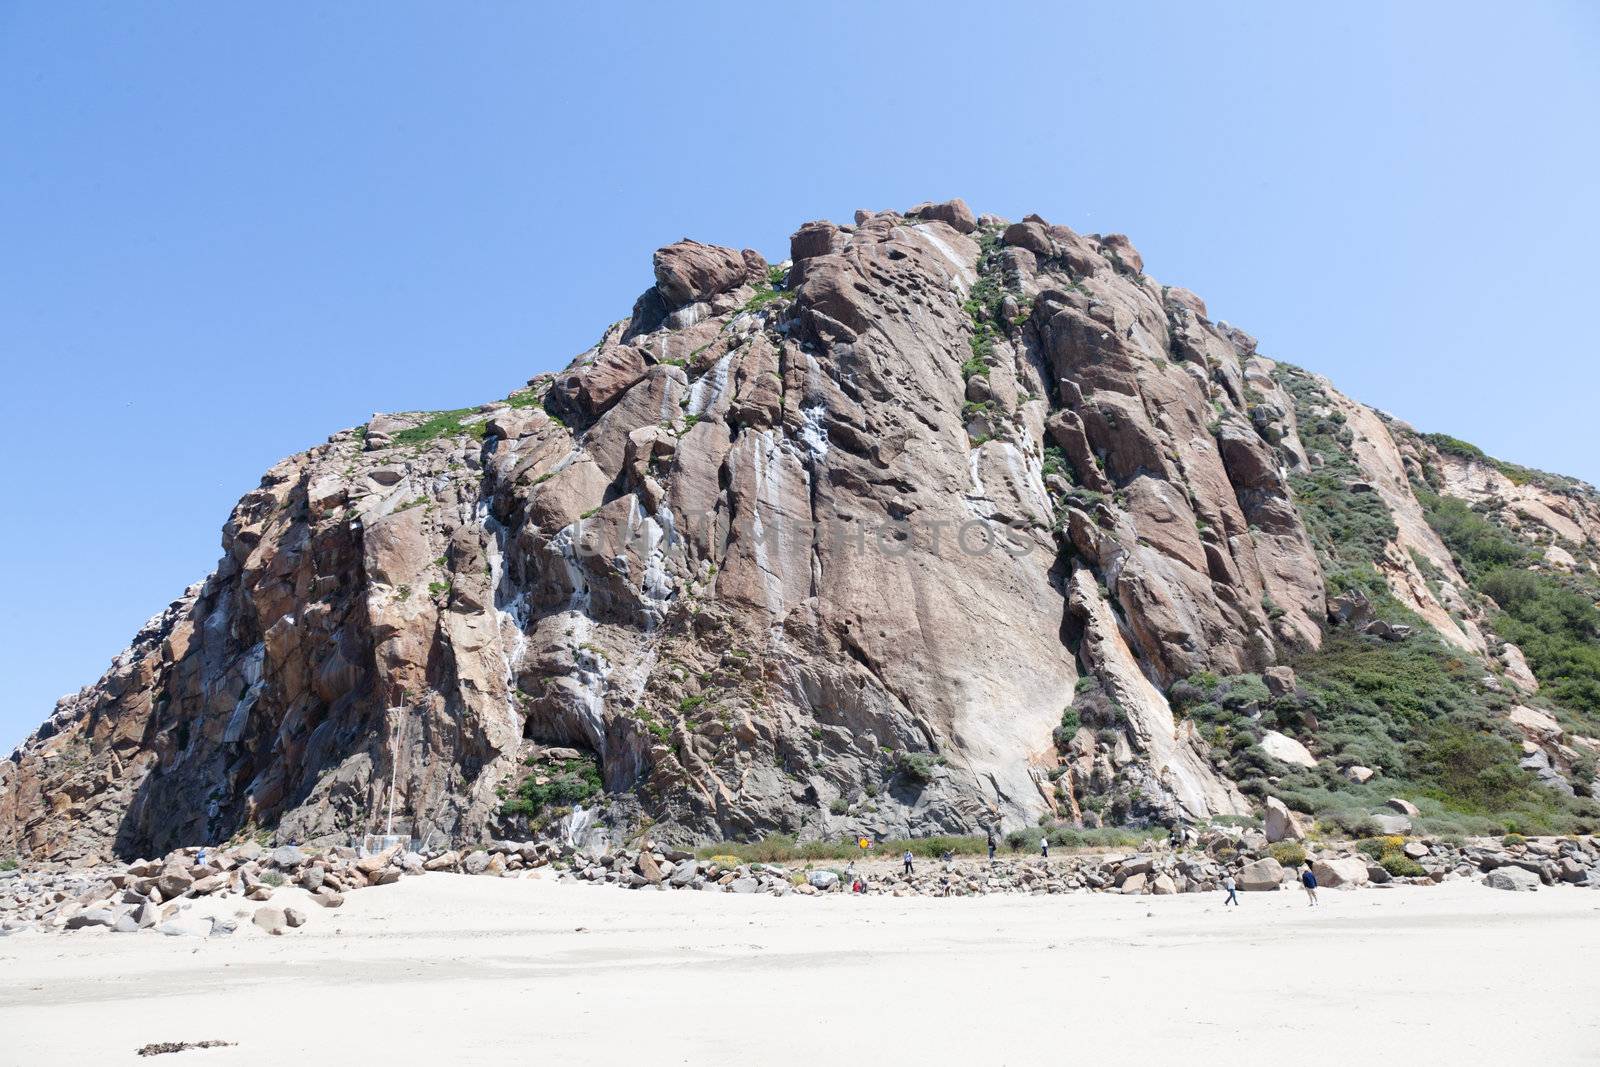 Morro Rock is a 581-foot (177 m) volcanic plug located just offshore from Morro Bay, California